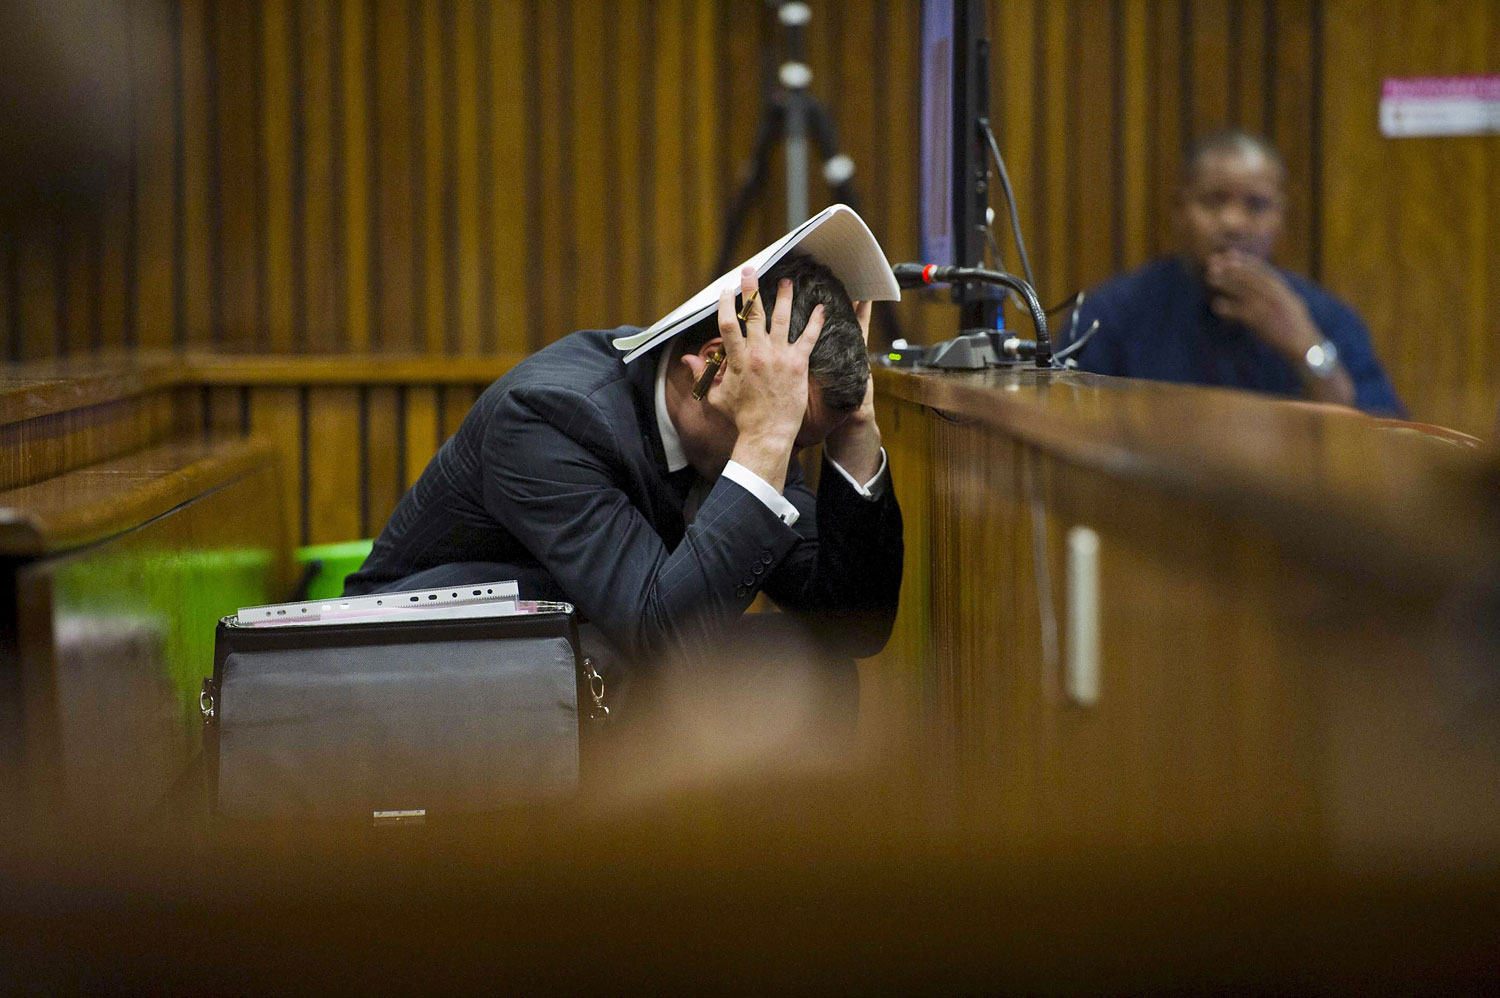 Oscar Pistorius at the Pretoria High Court on March 13, 2014, in Pretoria, South Africa. (Getty Images)